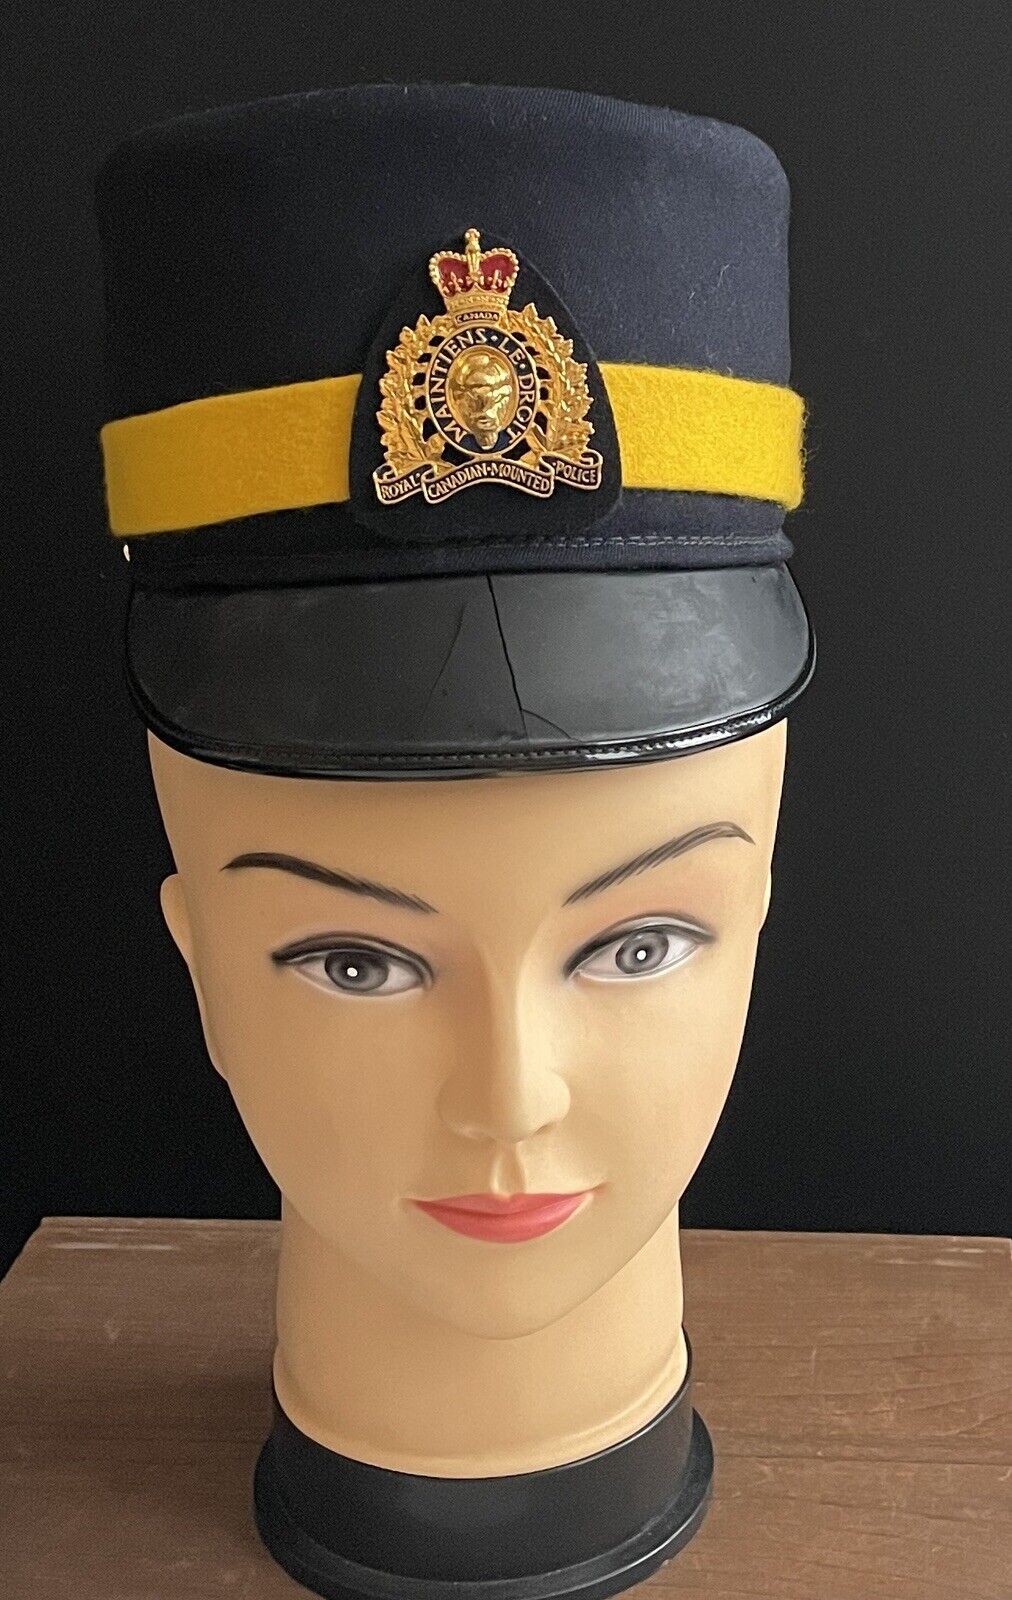 RARE Women’s 1979 Royal Canadian Mounted Police Cap Scully RCMP Obsolete Pin